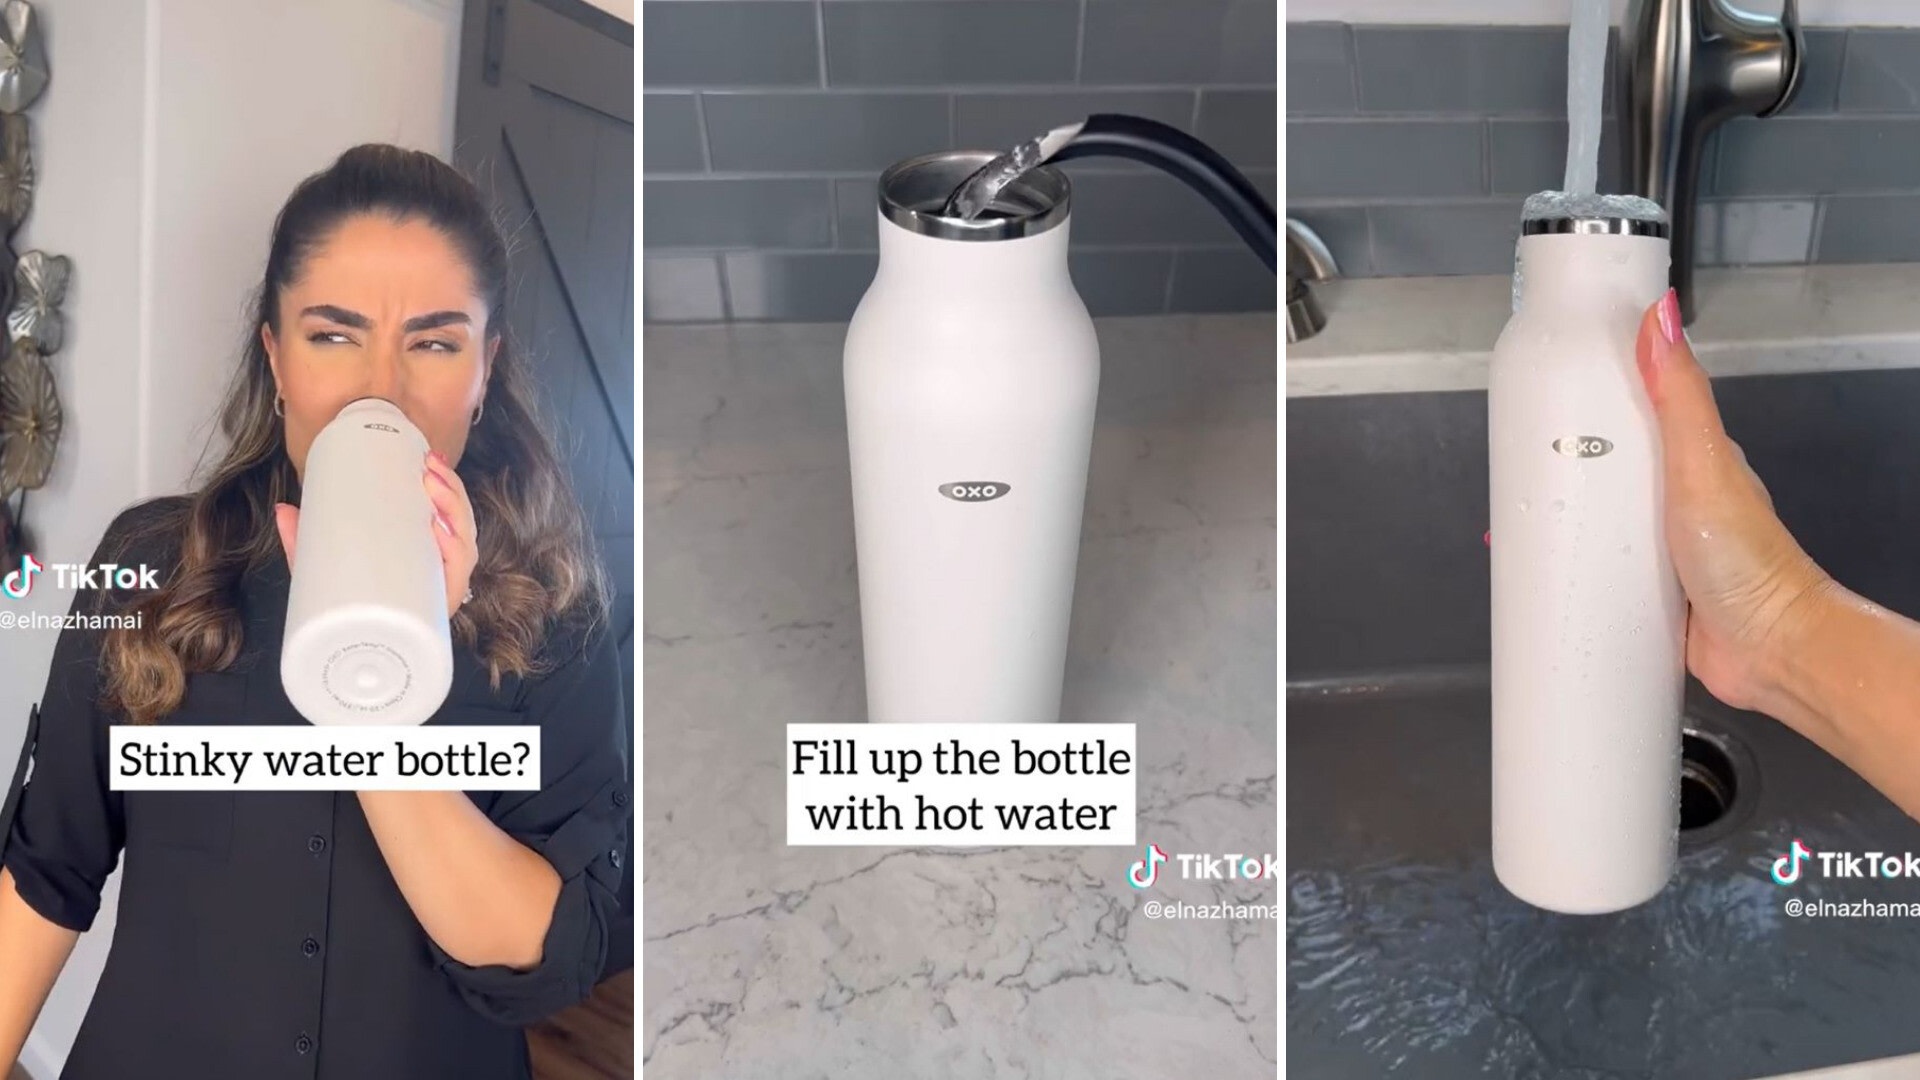 TikToker shows how to remove odors from a reusable water bottle